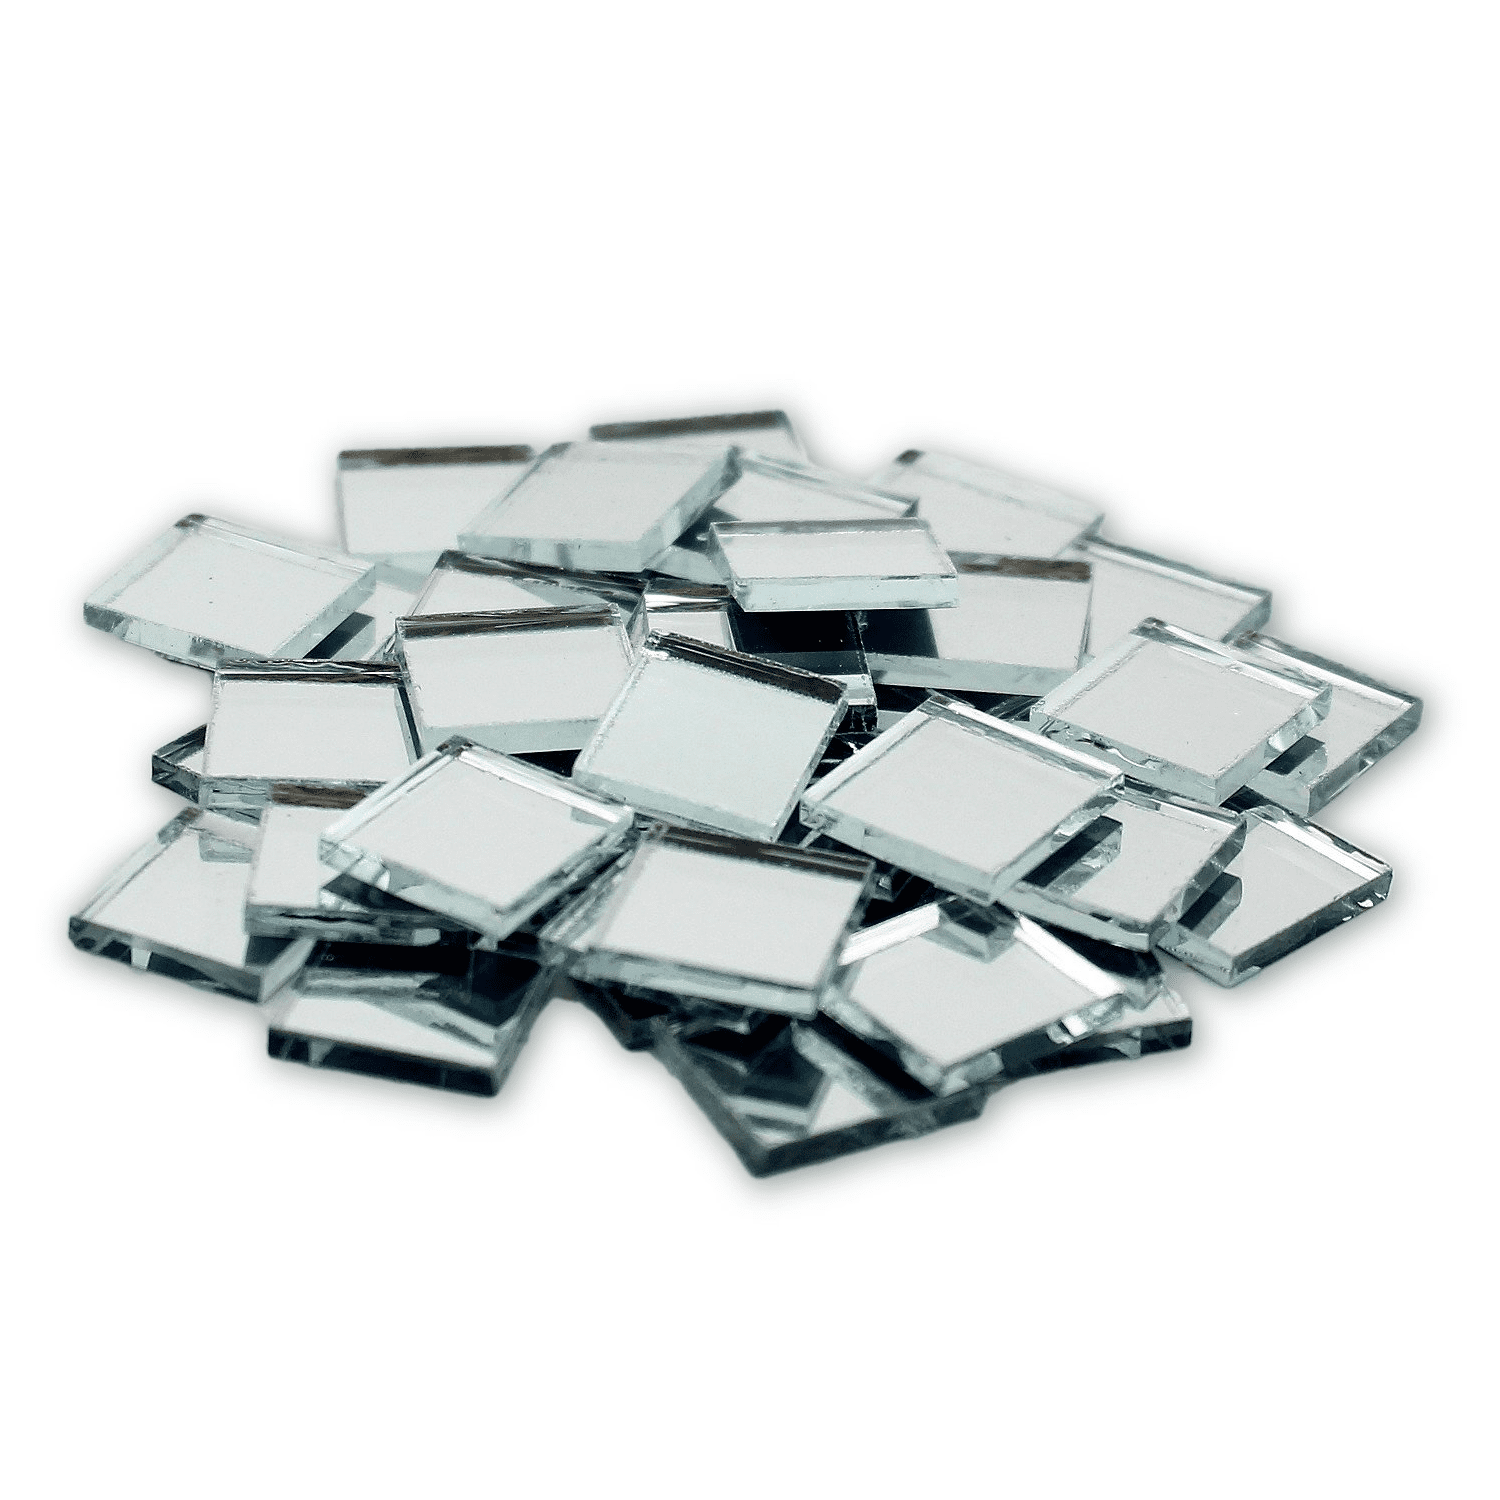 0.5 inch Small Mini Square Craft Mirrors 25 Pieces Mirror Mosaic Tiles